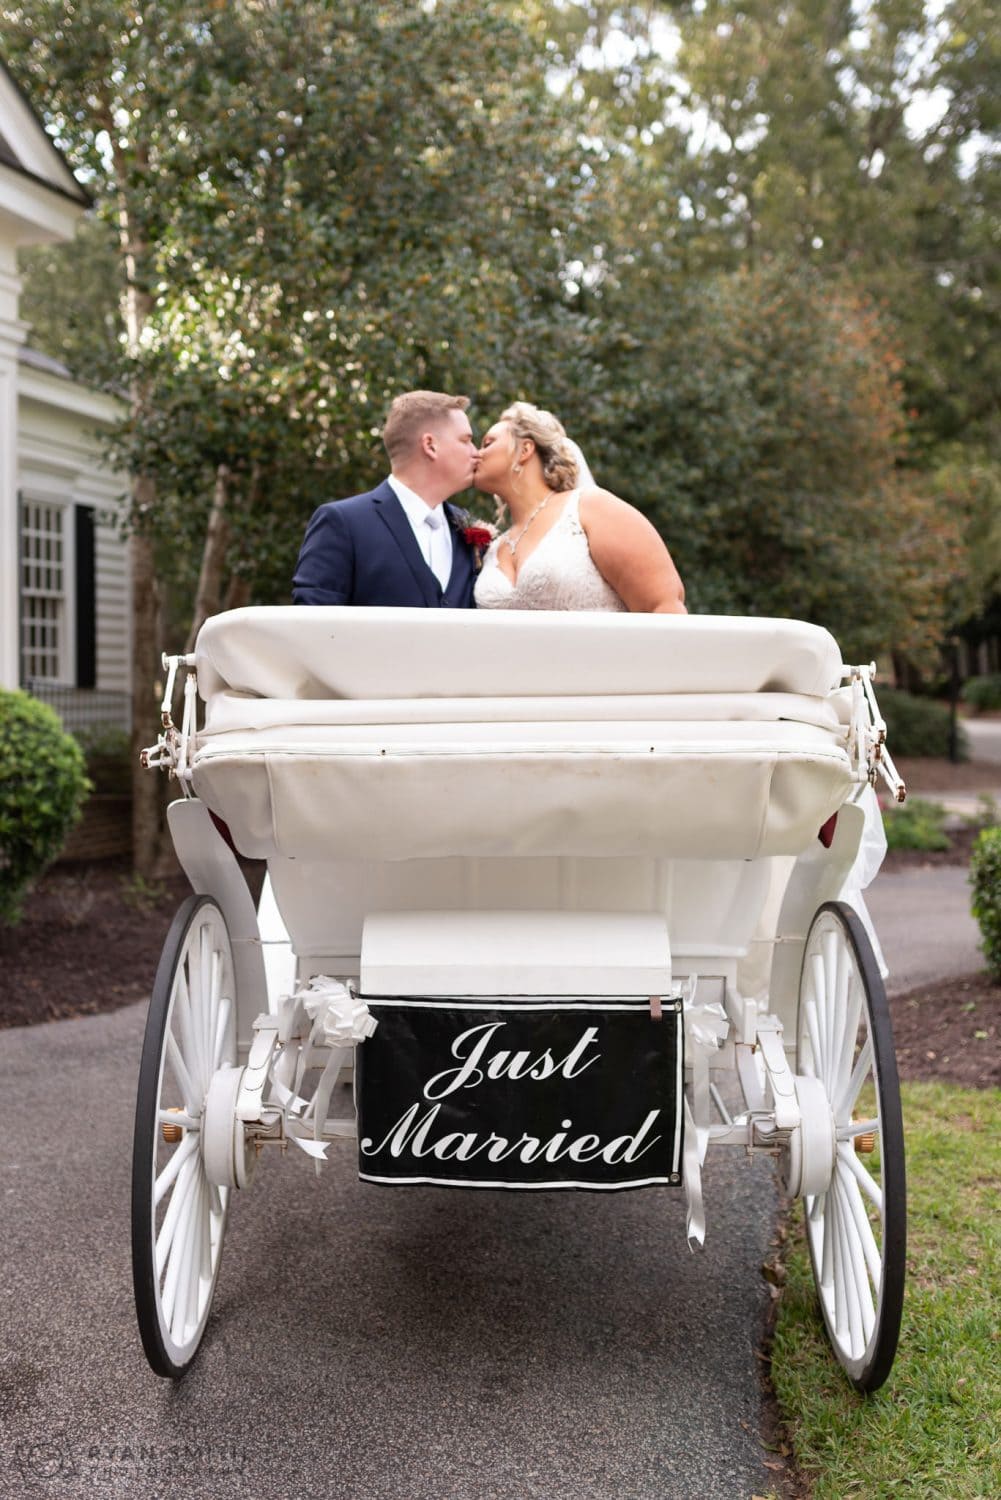 Kiss on the horse drawn carriage